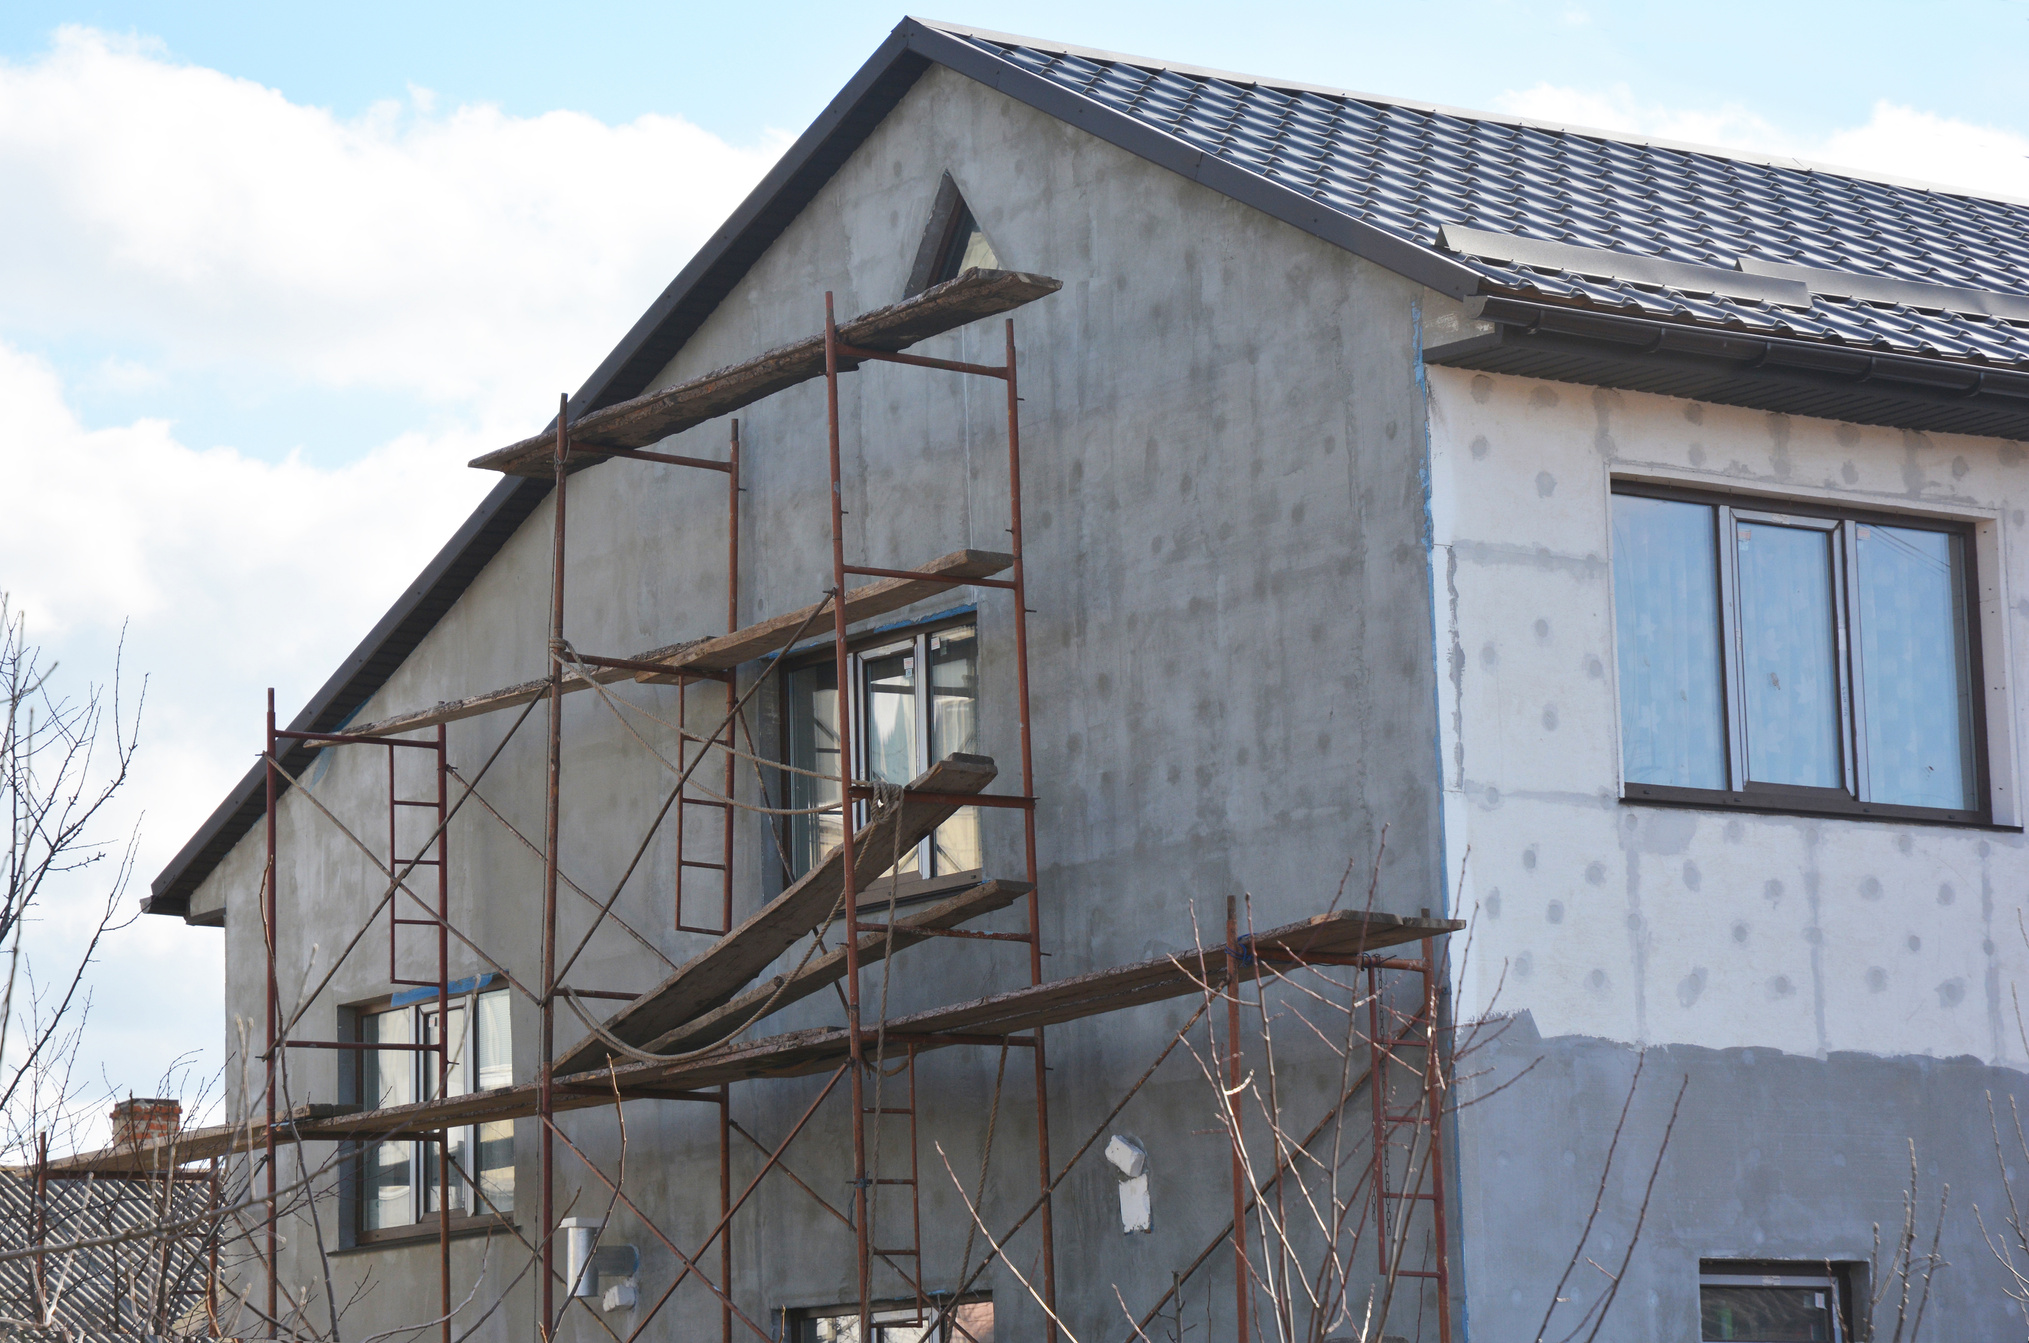 Painting, Plastering, Stucco  and insulate Exterior House Wall. Facade Thermal Insulation and Painting Repair Works During Exterior Renovations. Wall Insulation and Repair.